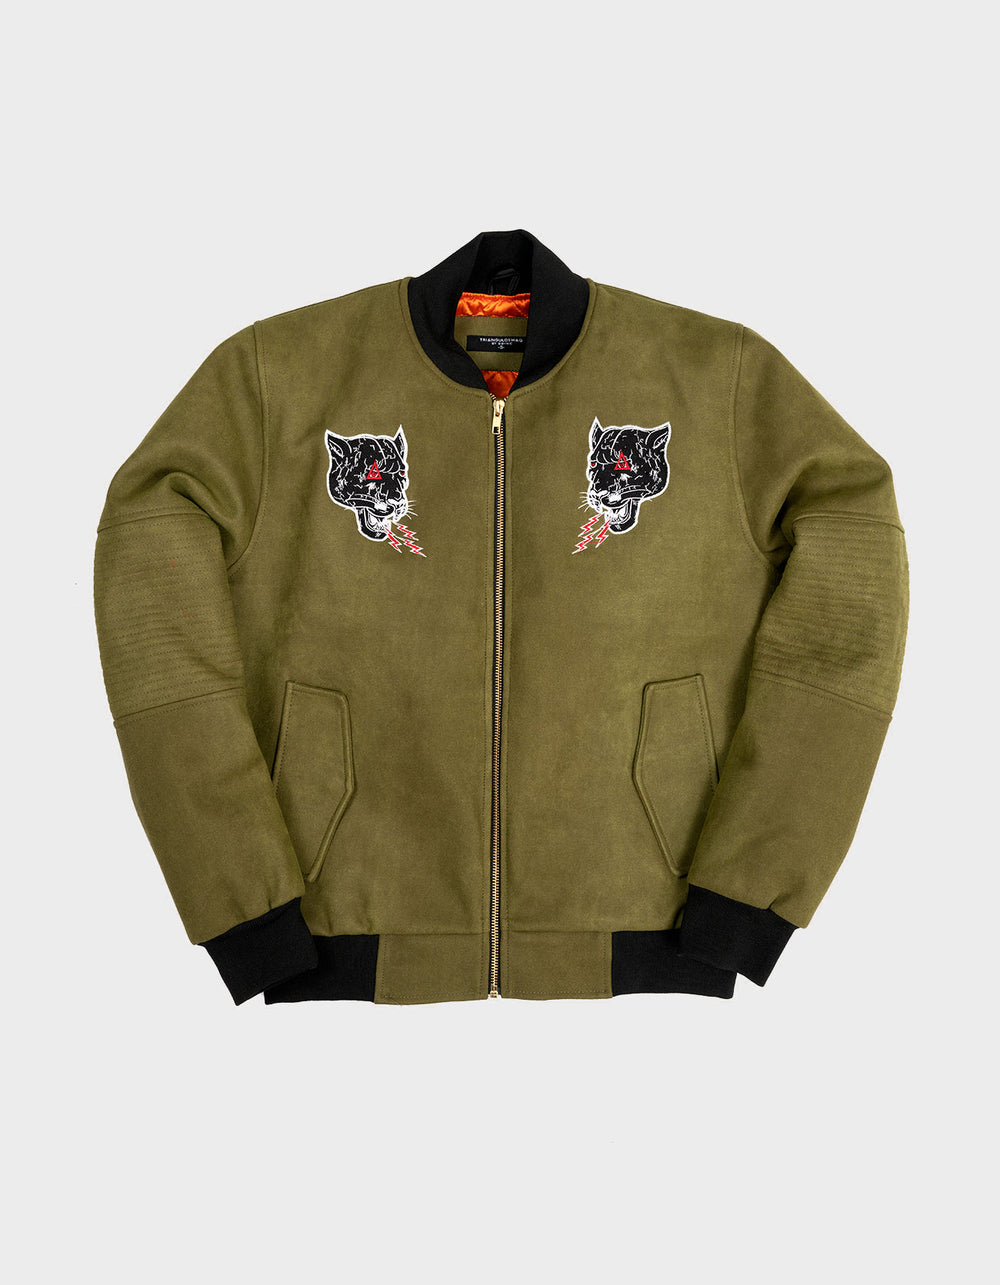 PANTHER OLIVE SUEDE JACKET - Triangulo Swag